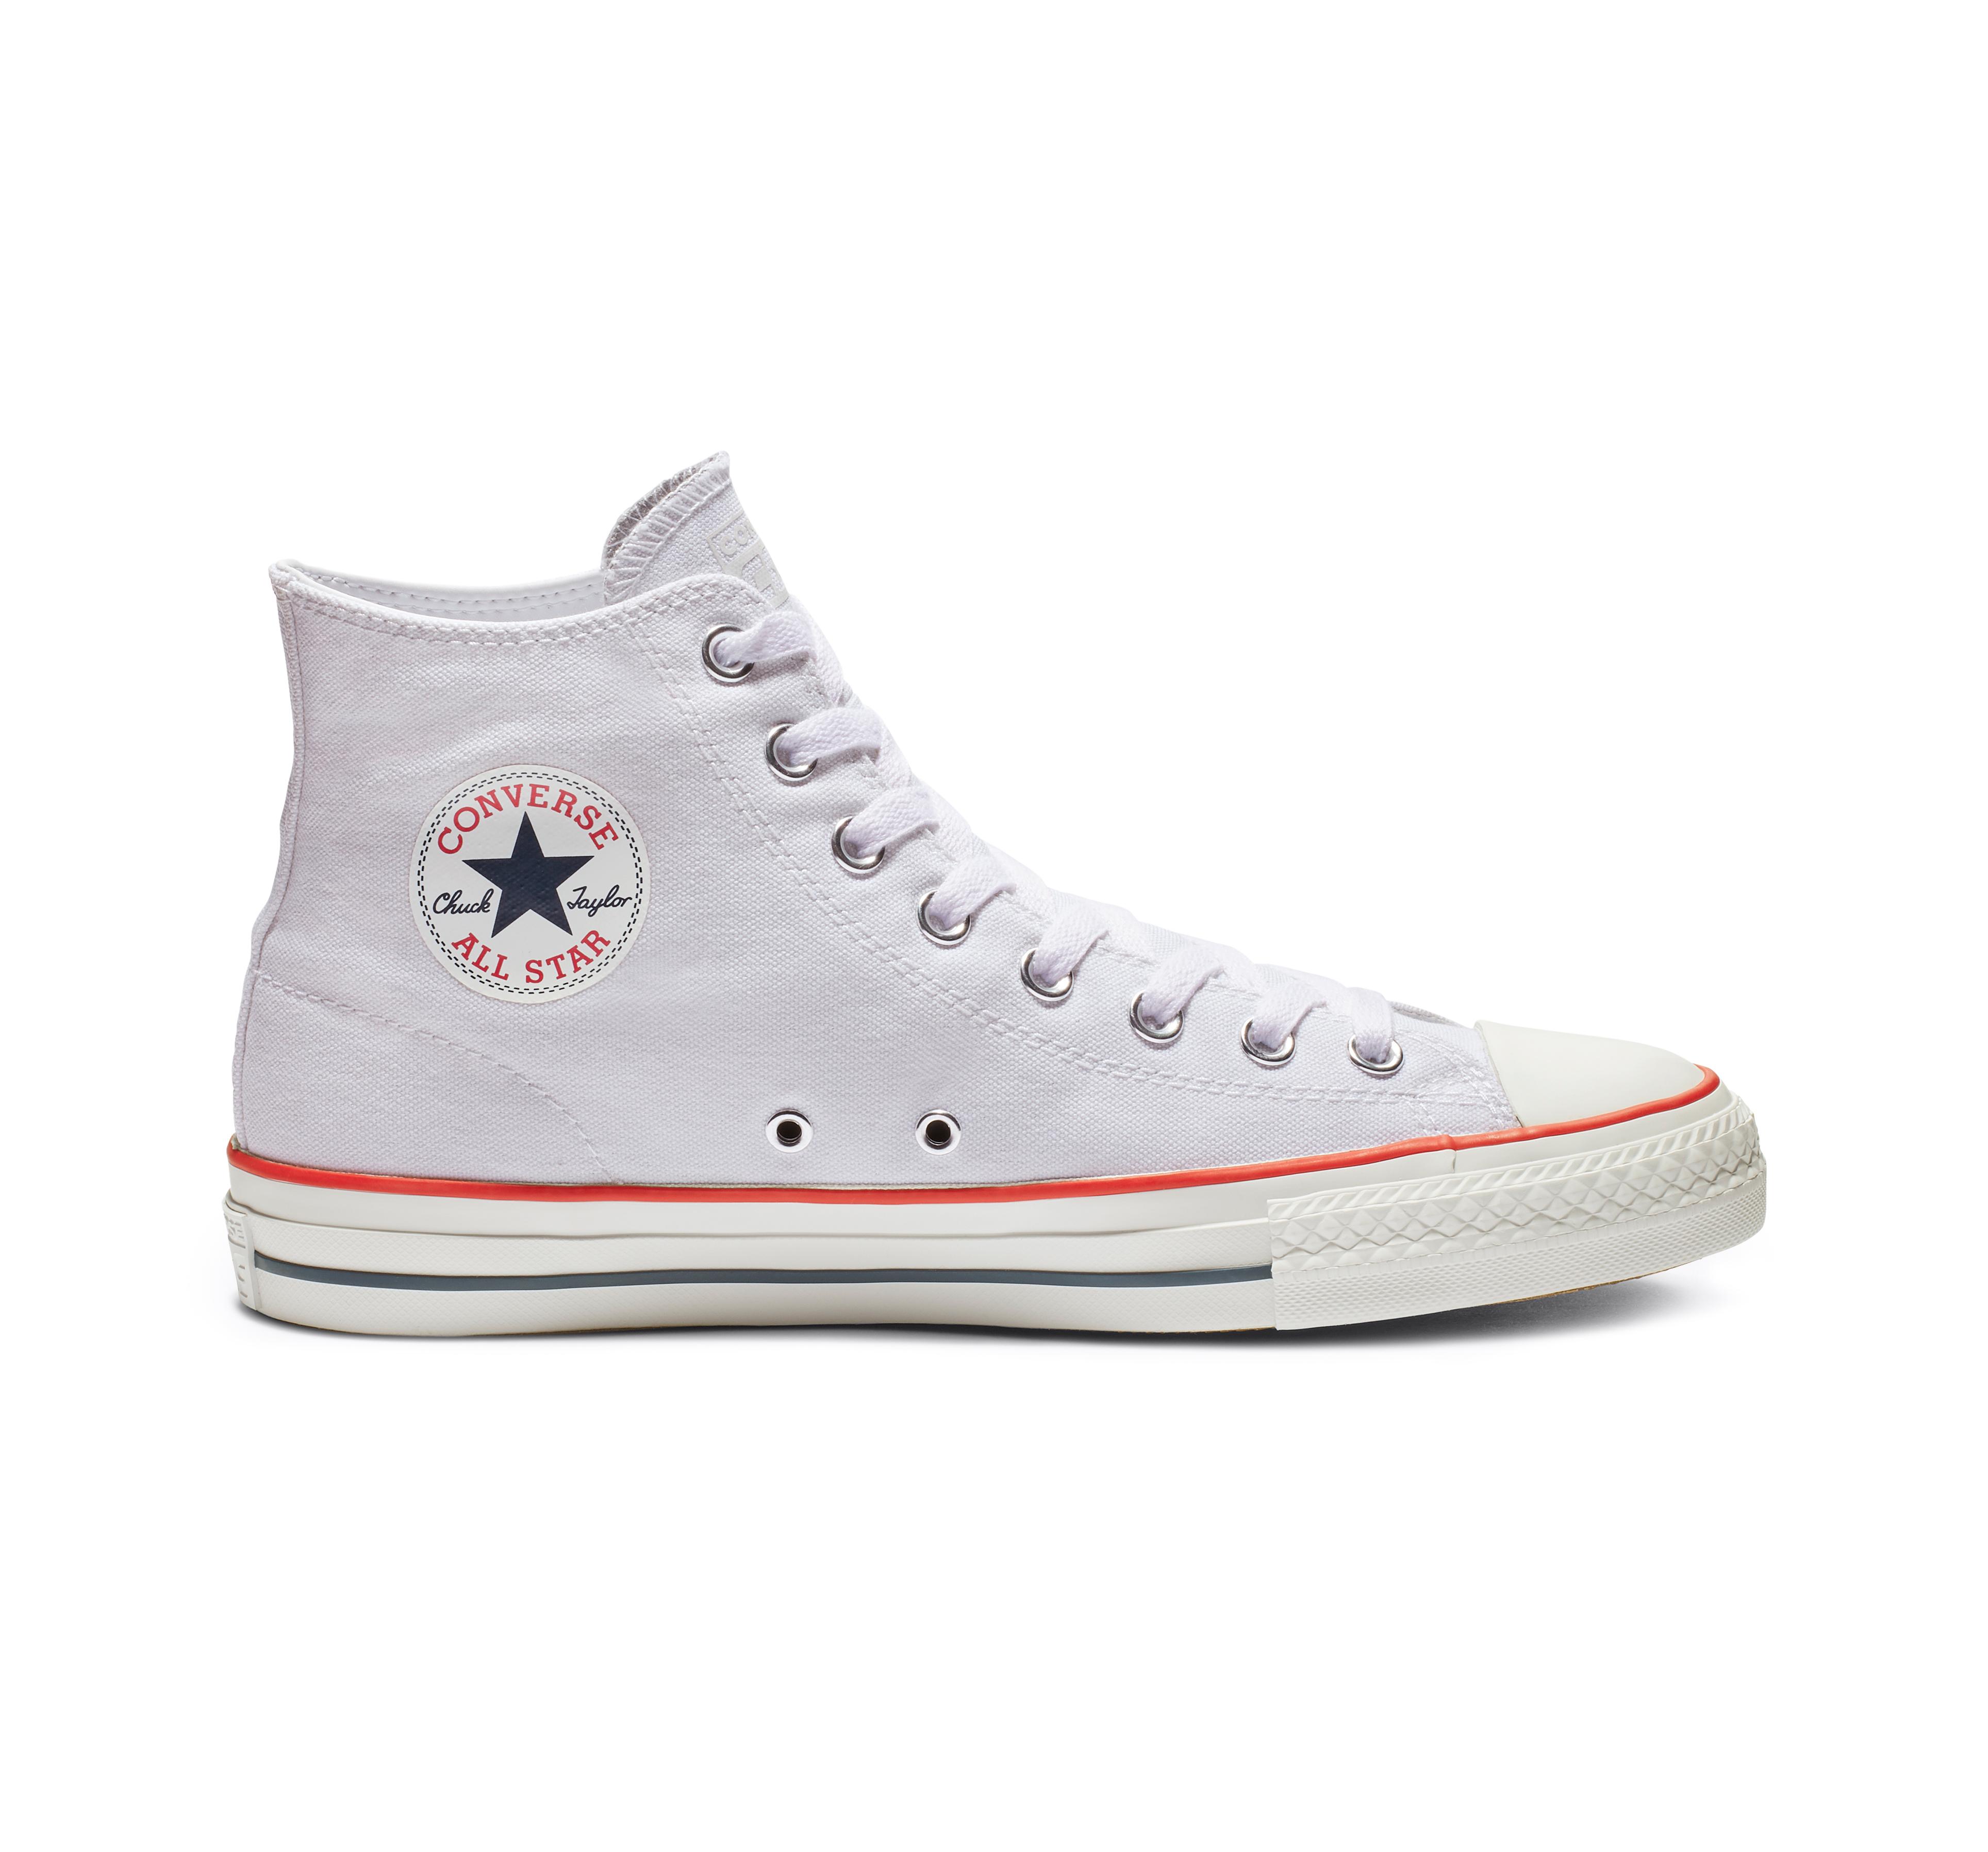 Converse CONS Converse Chuck Taylor All Star Pro High Top Shoes in ...